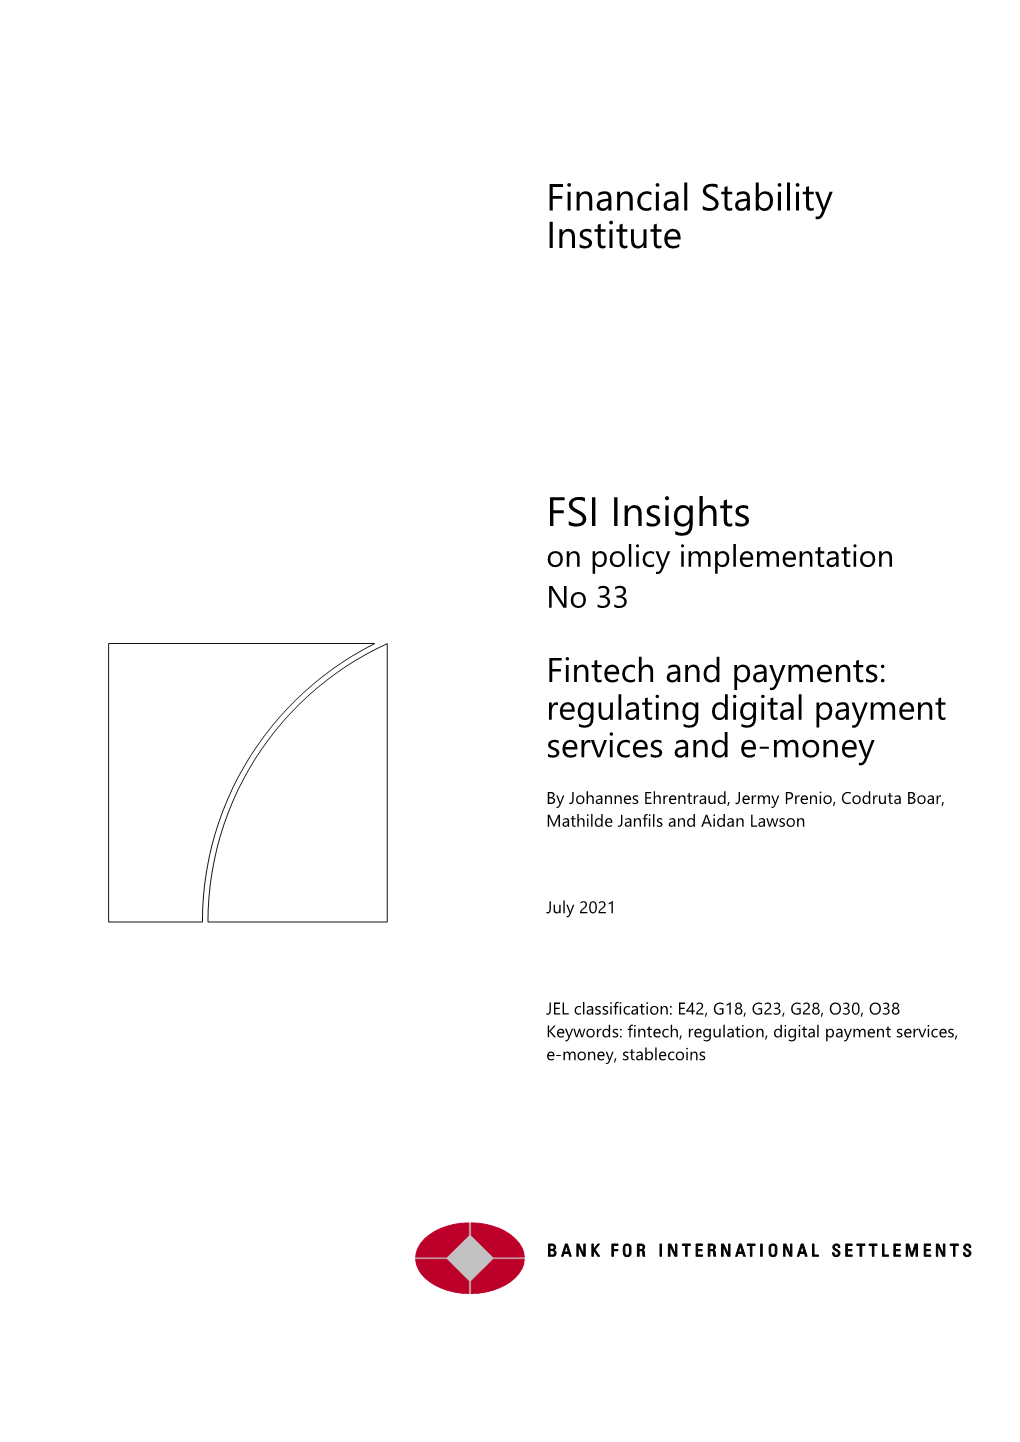 Fintech and Payments: Regulating Digital Payment Services and E-Money